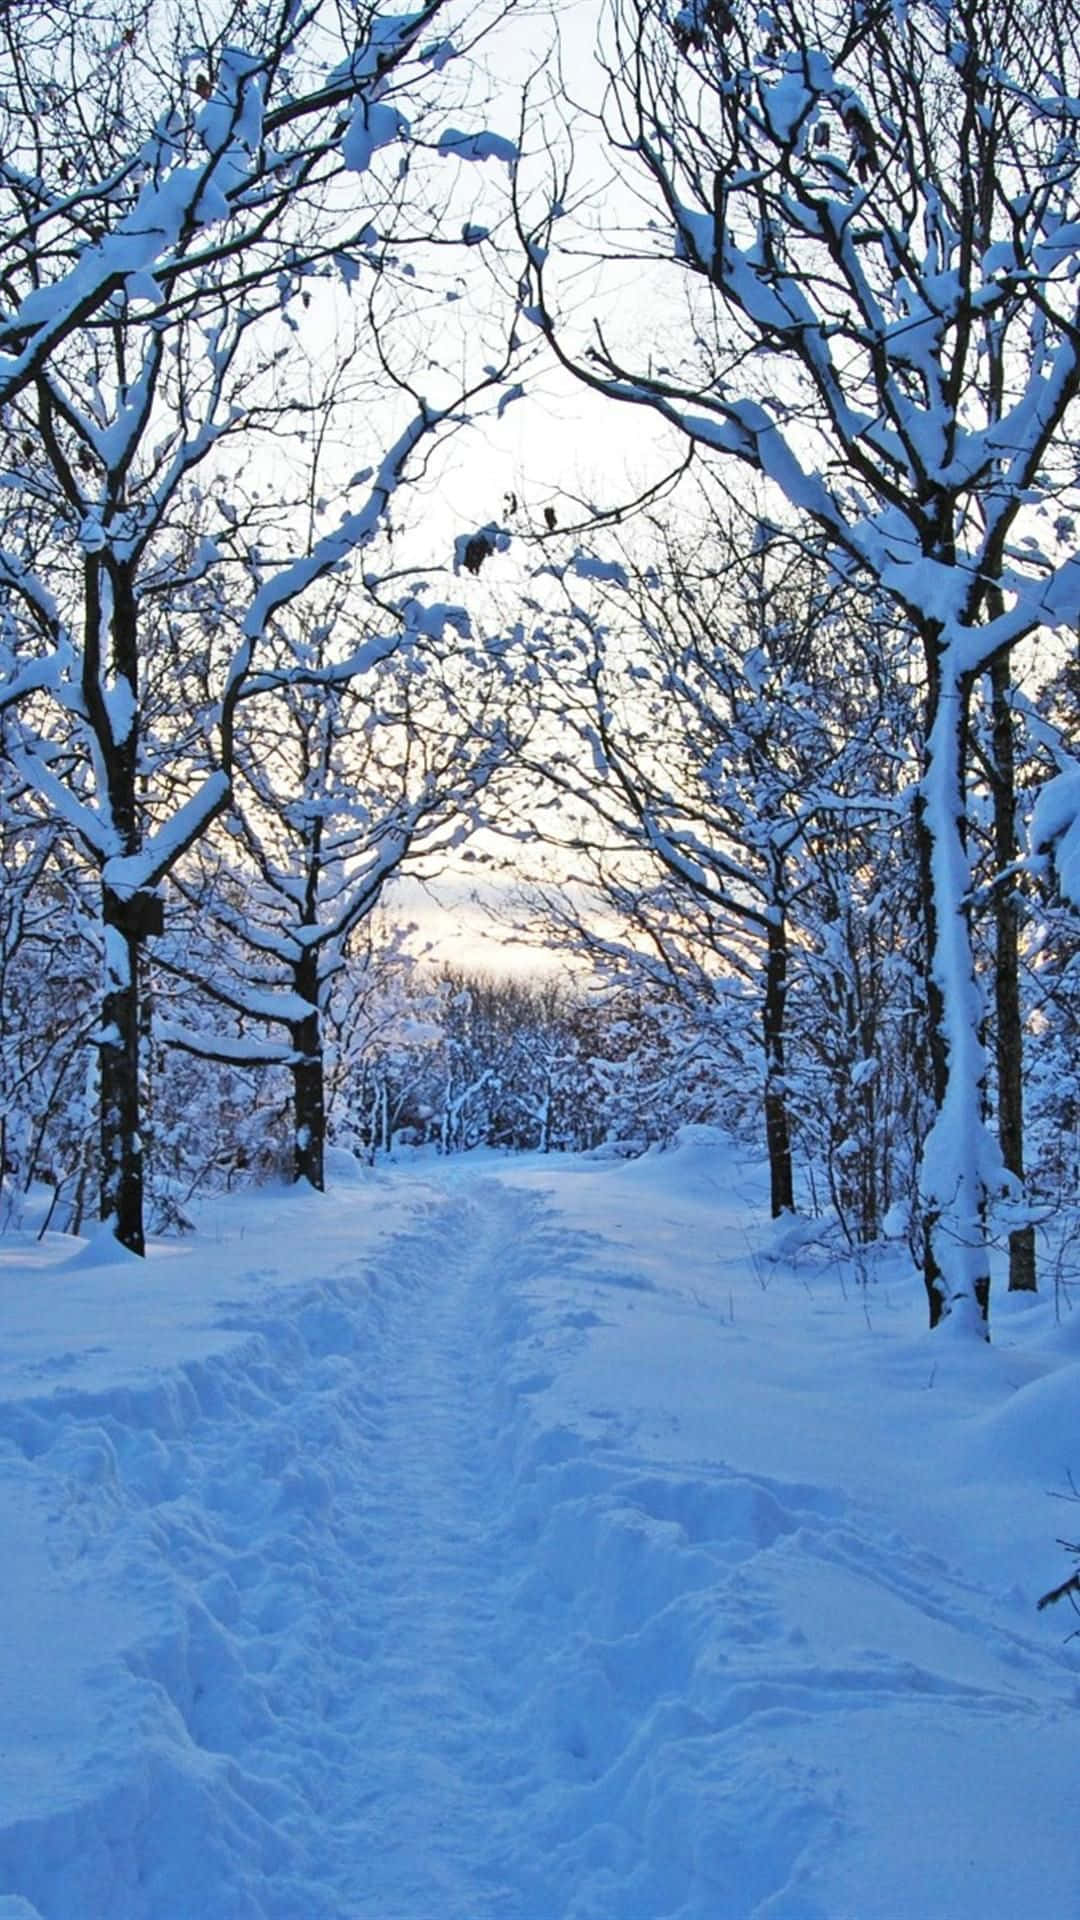 Enjoy the peaceful beauty of nature in winter with your iPhone Wallpaper